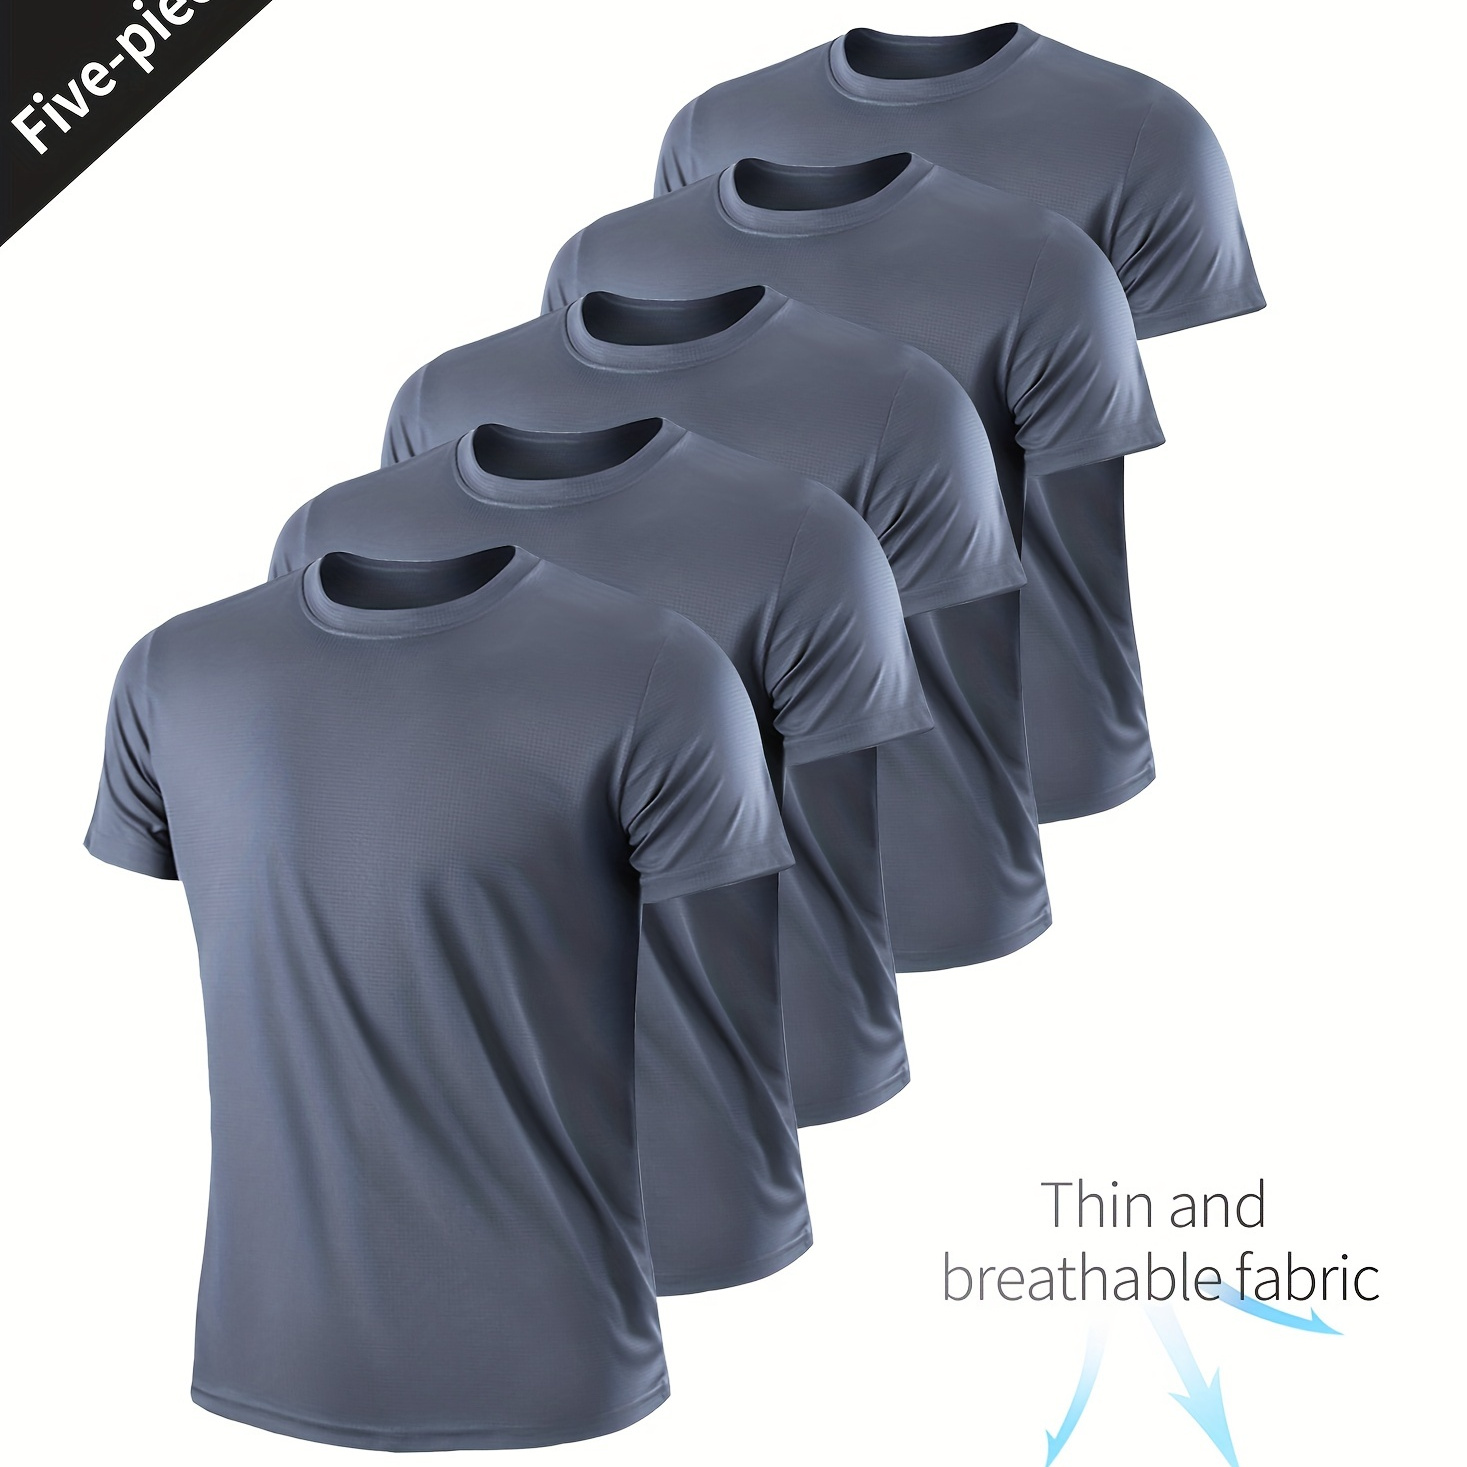 

5pcs Ultralight Men's Crew Neck T-shirt - Quick Drying, Breathable, Sweat Absorbing For Fitness, Gym, Running And Bodybuilding